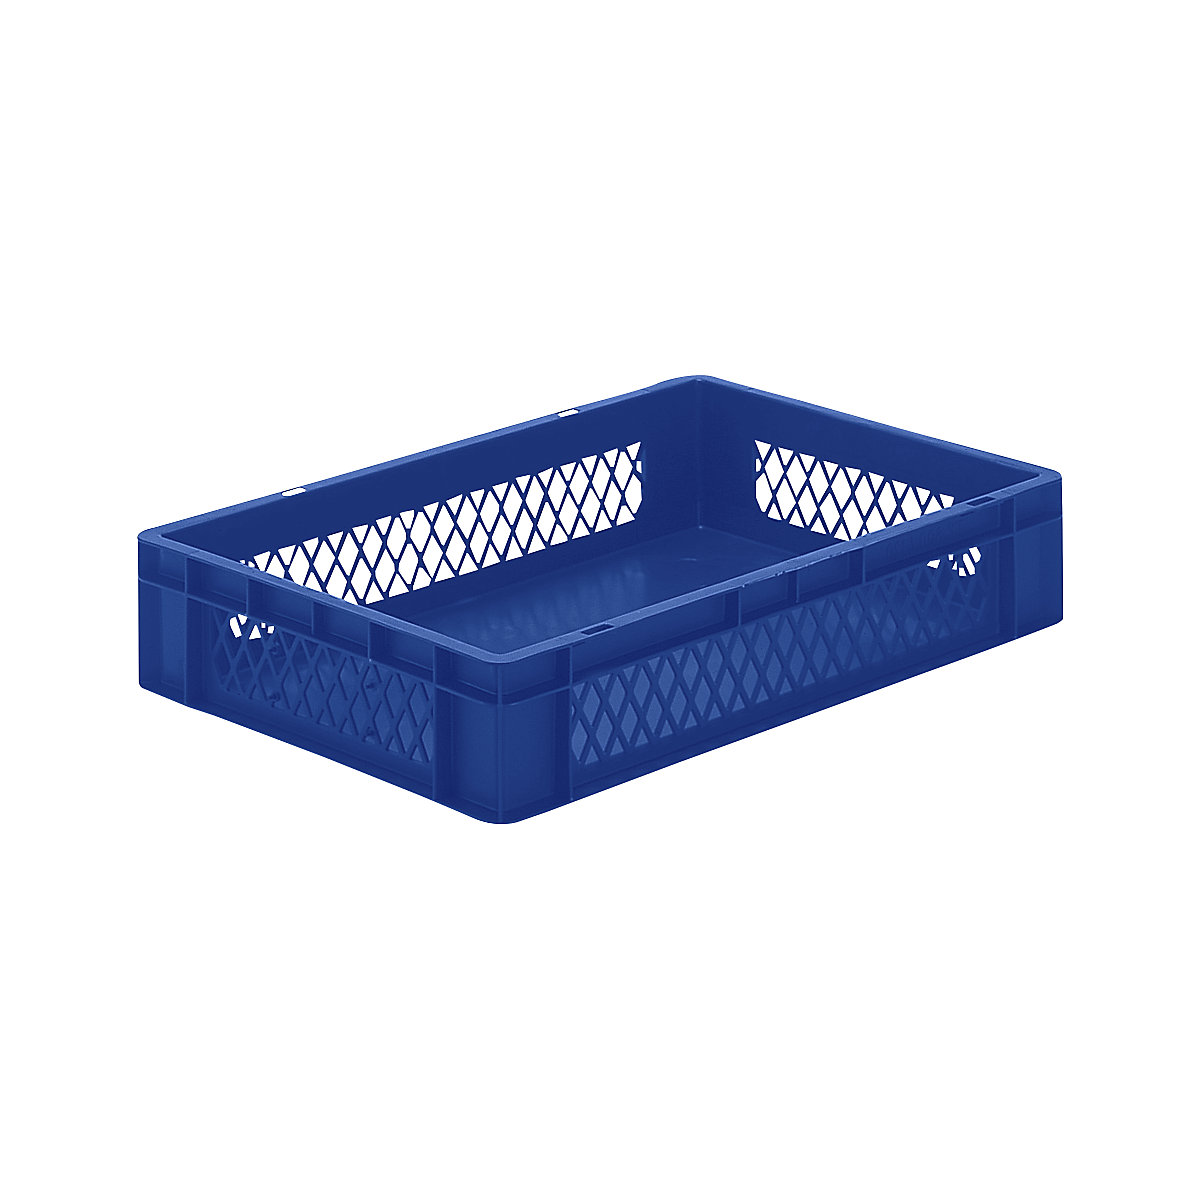 Euro stacking container, perforated walls, closed base, LxWxH 600 x 400 x 120 mm, blue, pack of 5-8